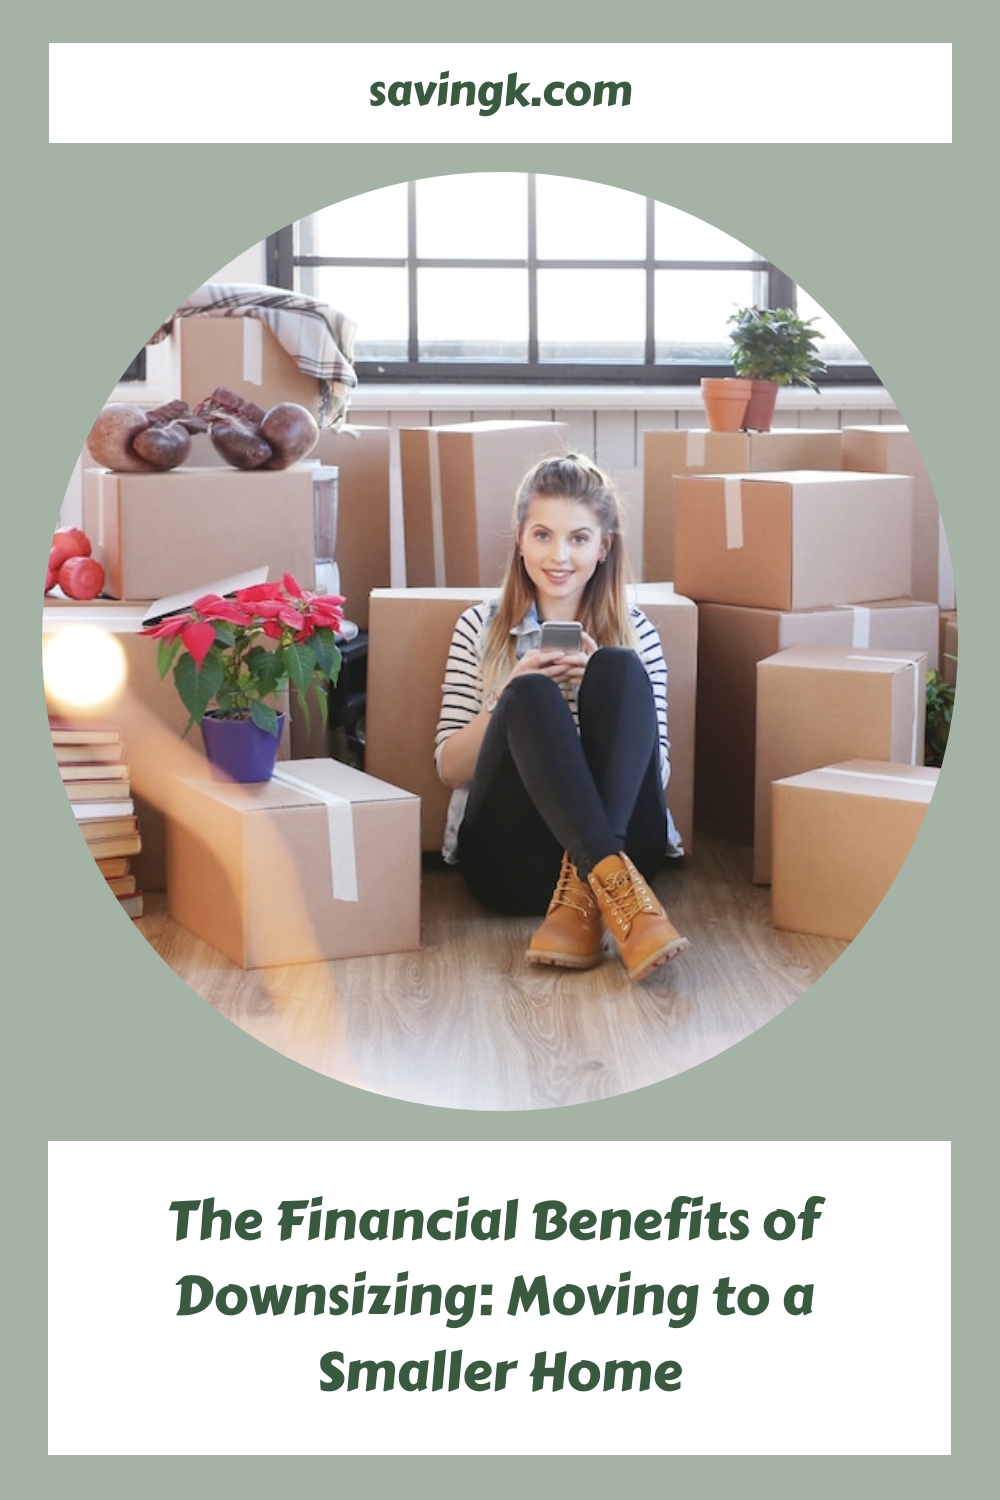 The Financial Benefits of Downsizing: Moving to a Smaller Home